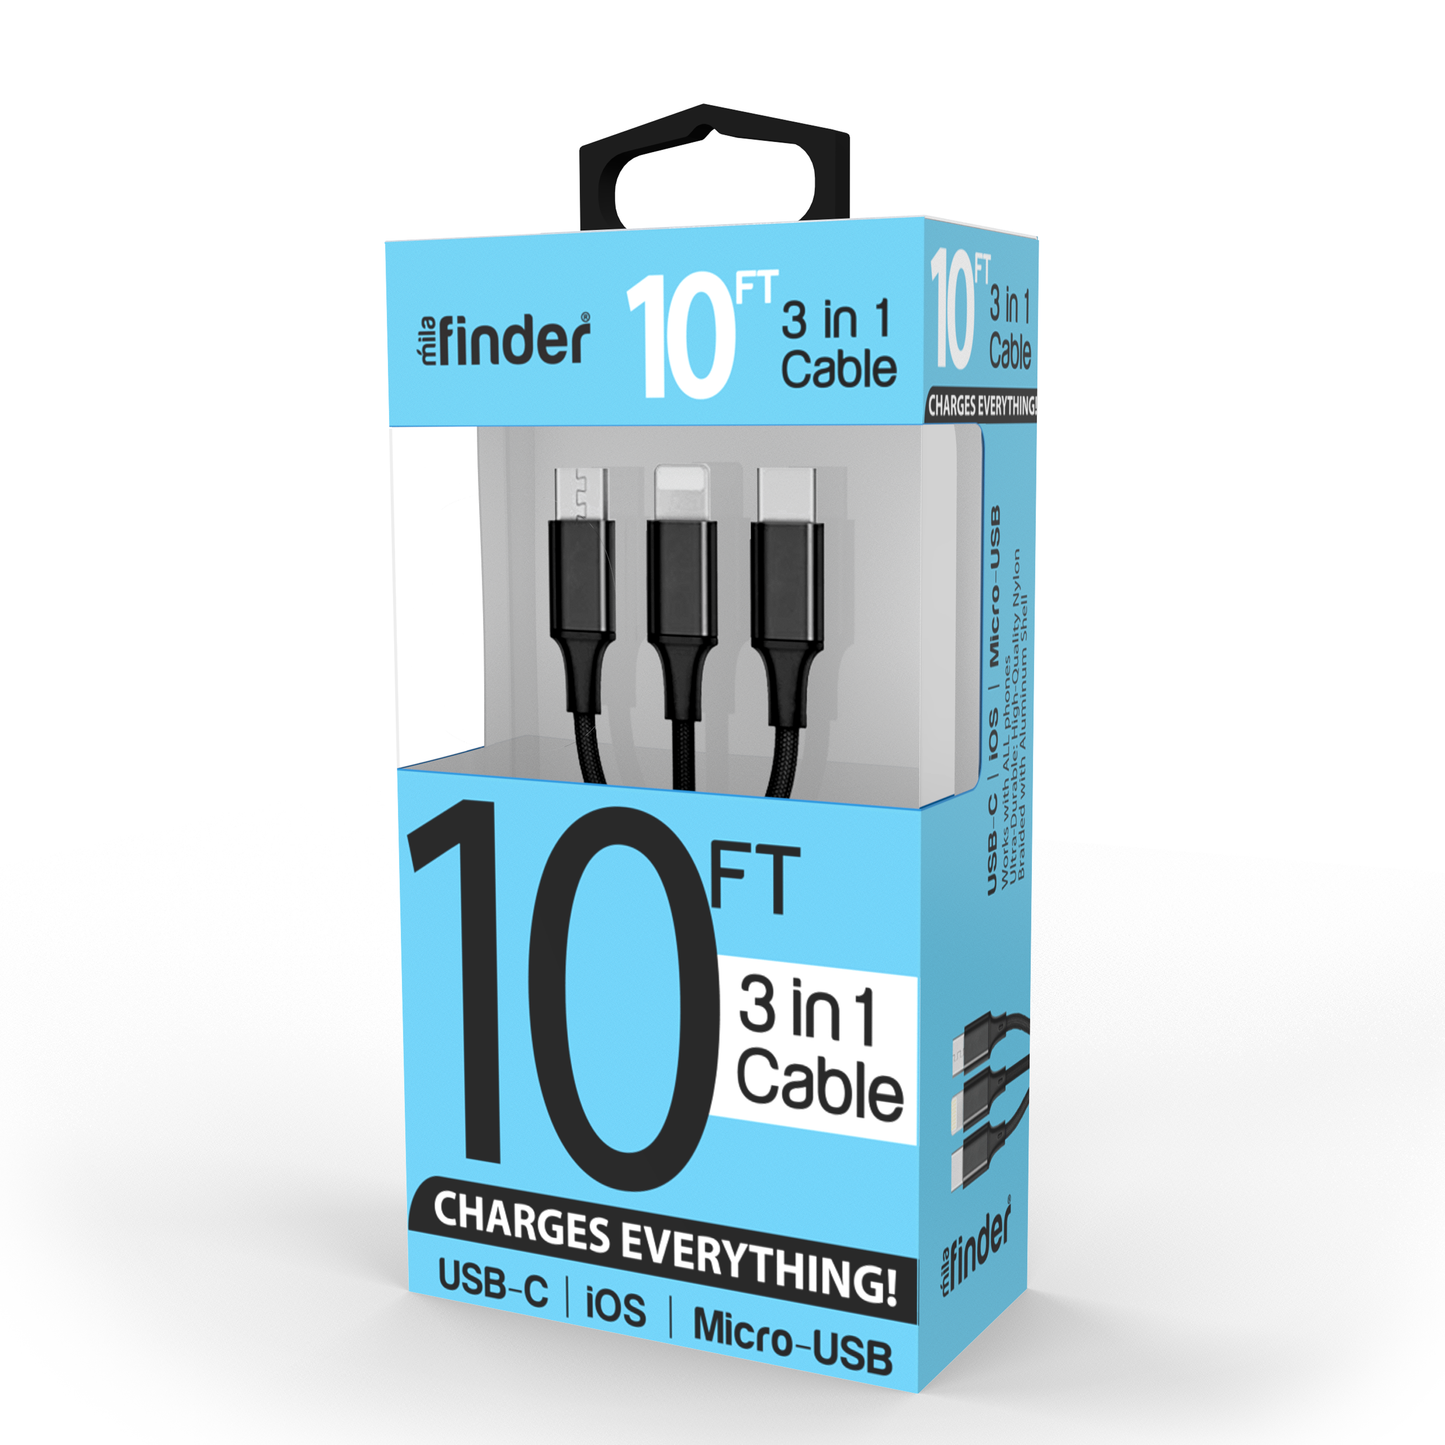 10 foot 3-in-1 USB Multi-Charging Cable Boxed